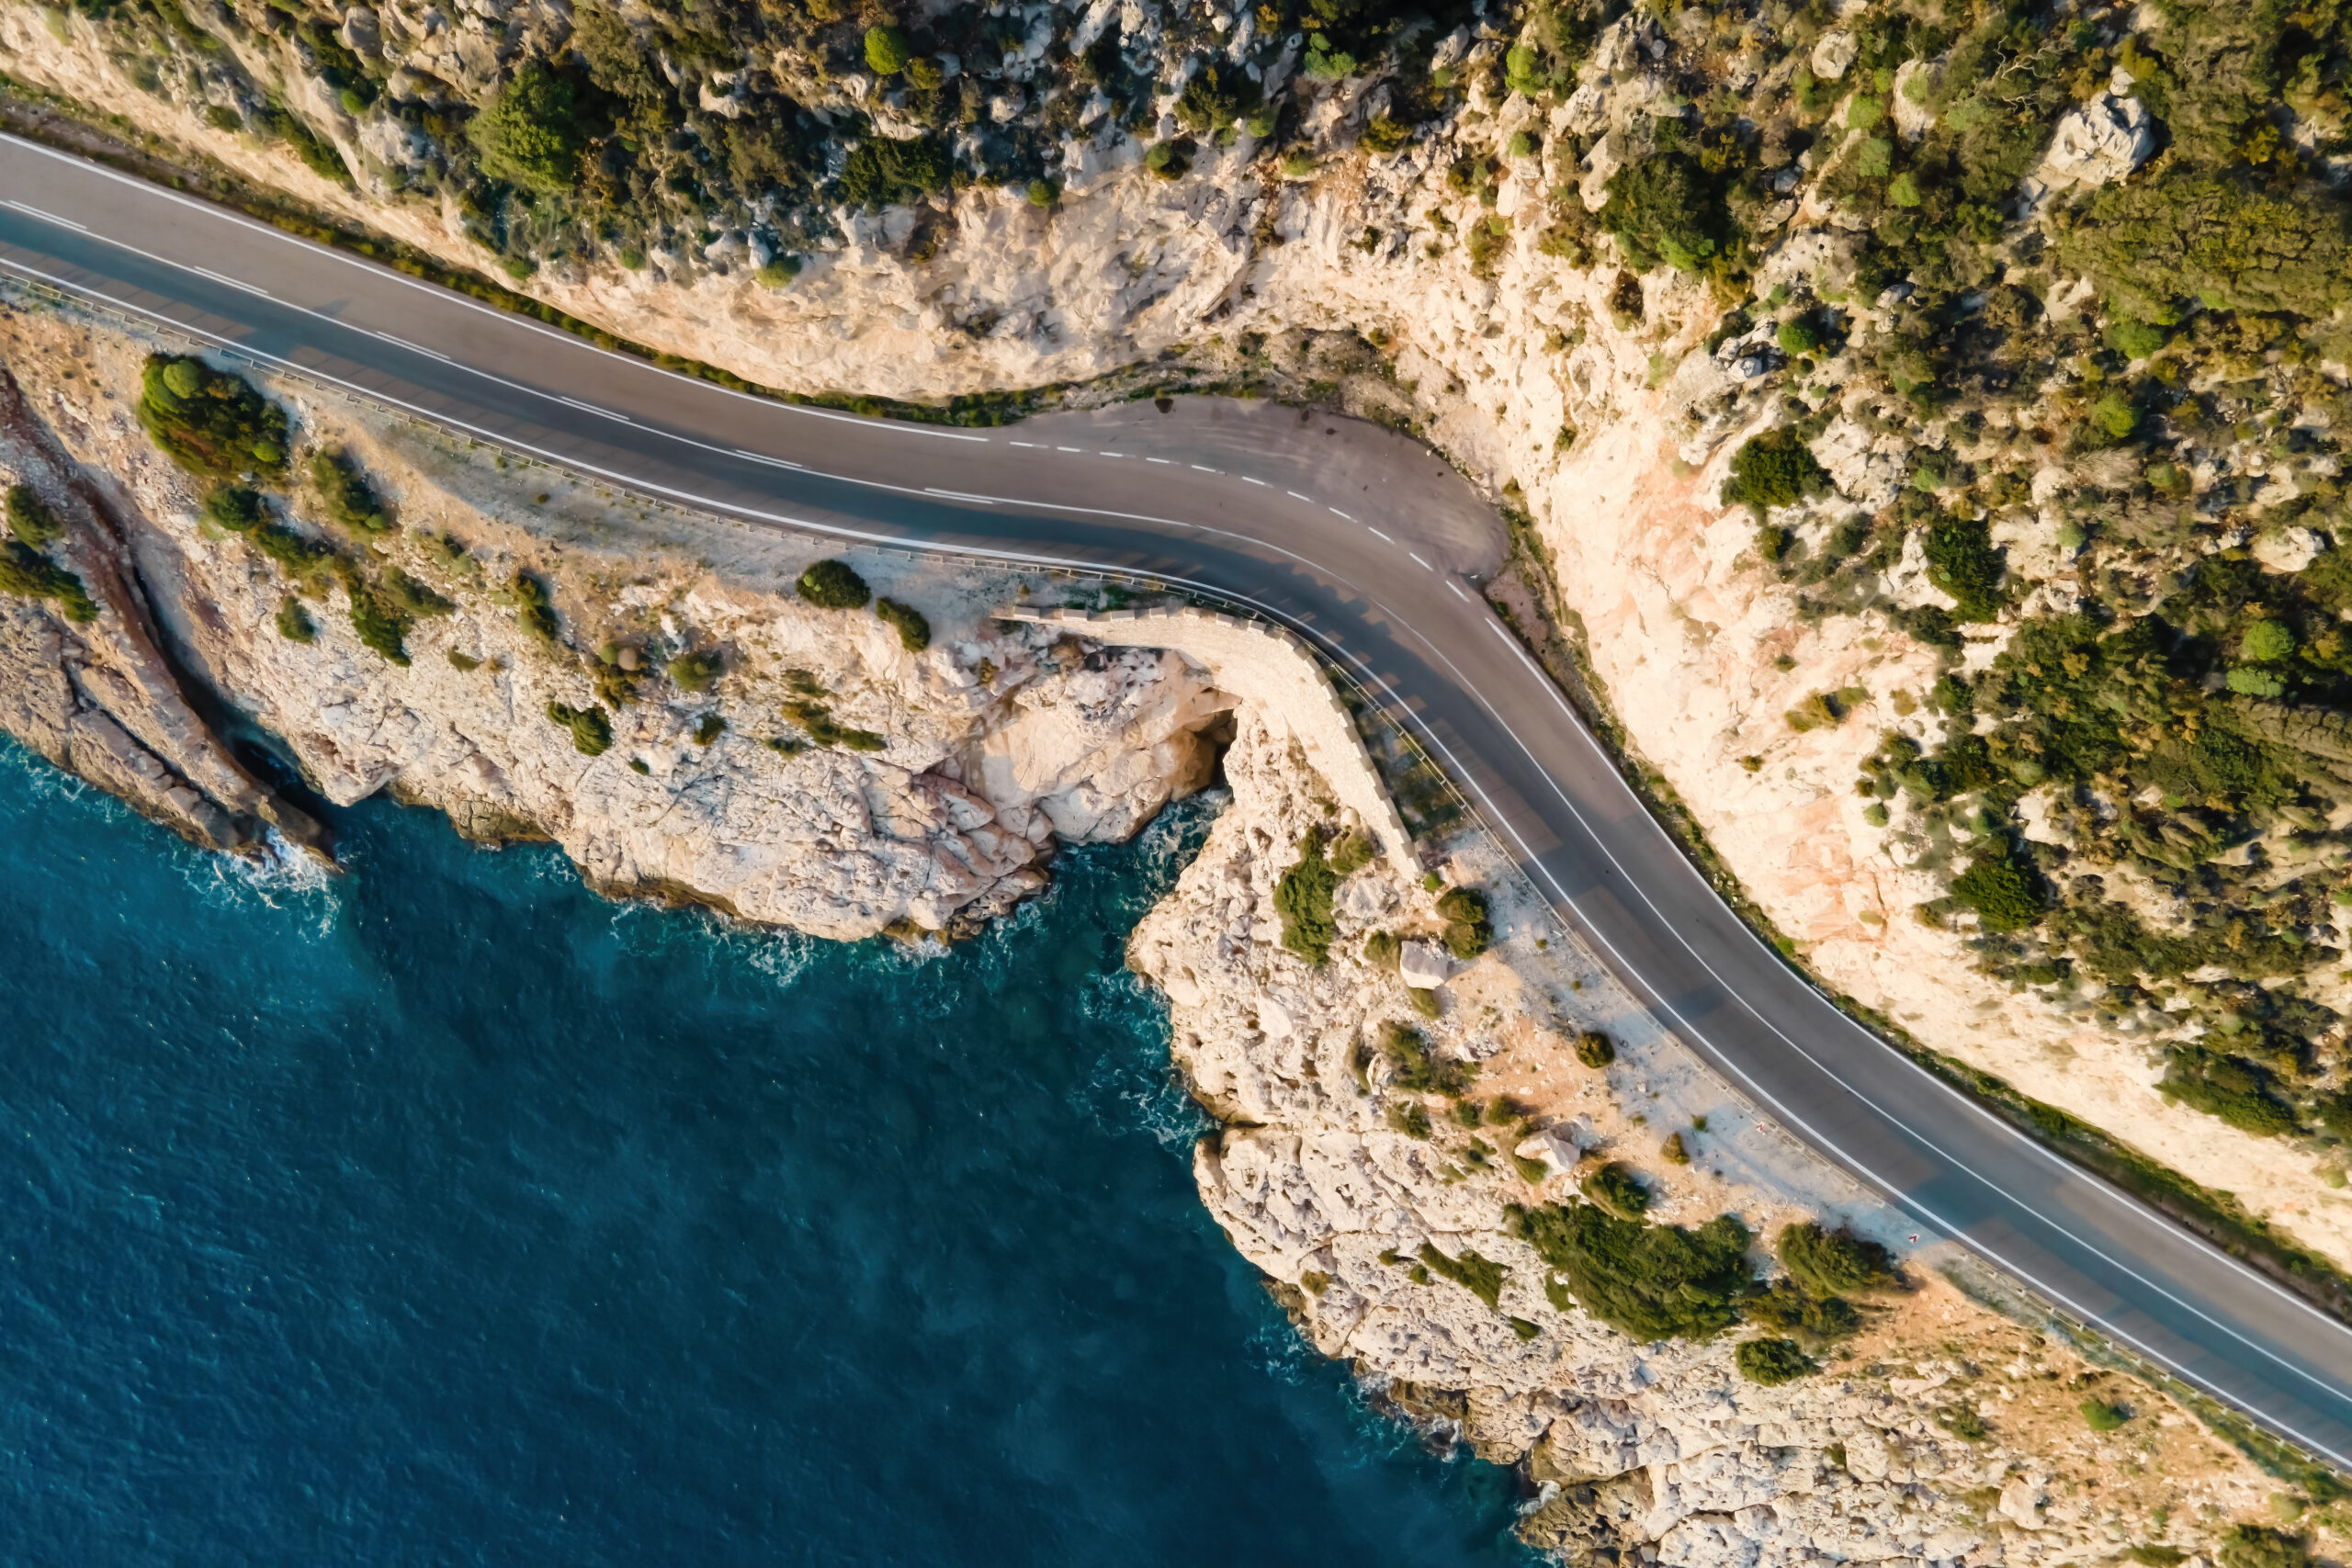 production-services-and-filming-in-turkey-coastal-road-along-rocky-cliffs-and-sea